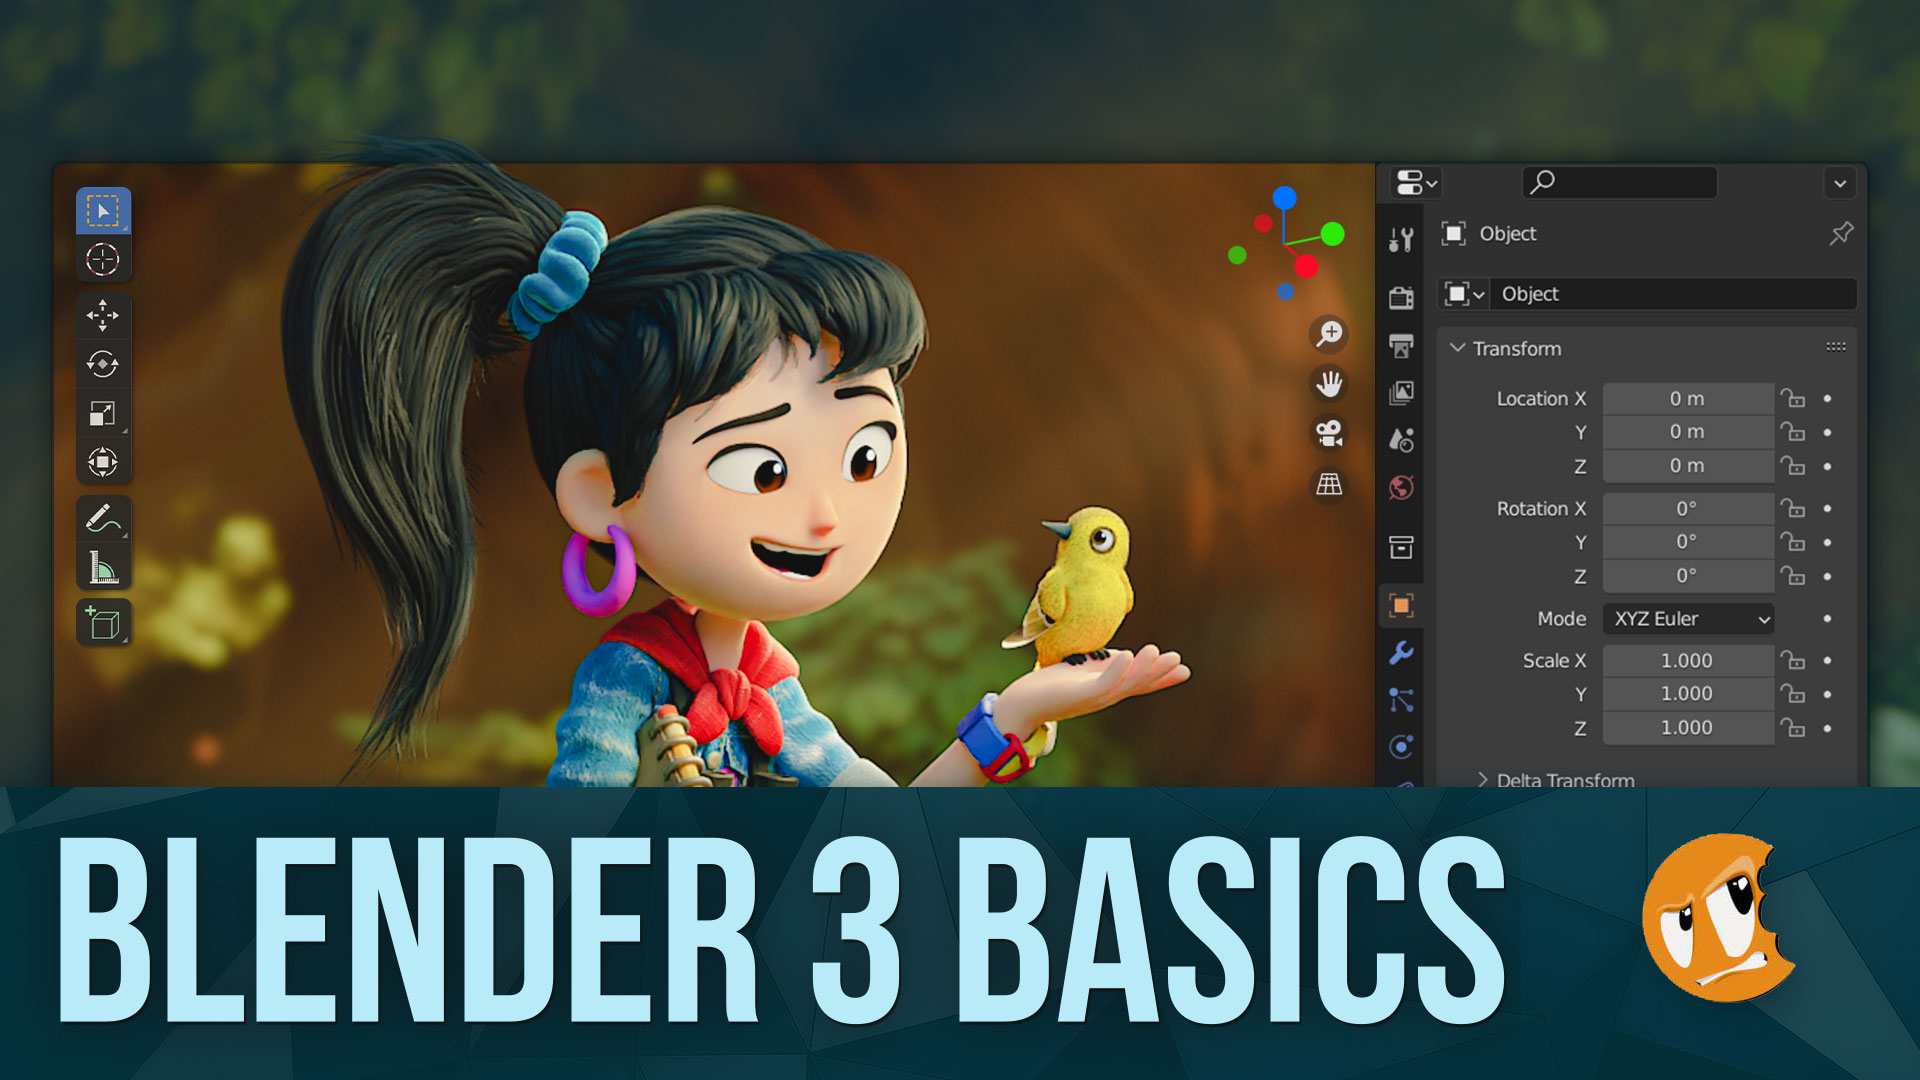 Introduction to Blender 3.0 BLENDER BASICS by CG Cookie